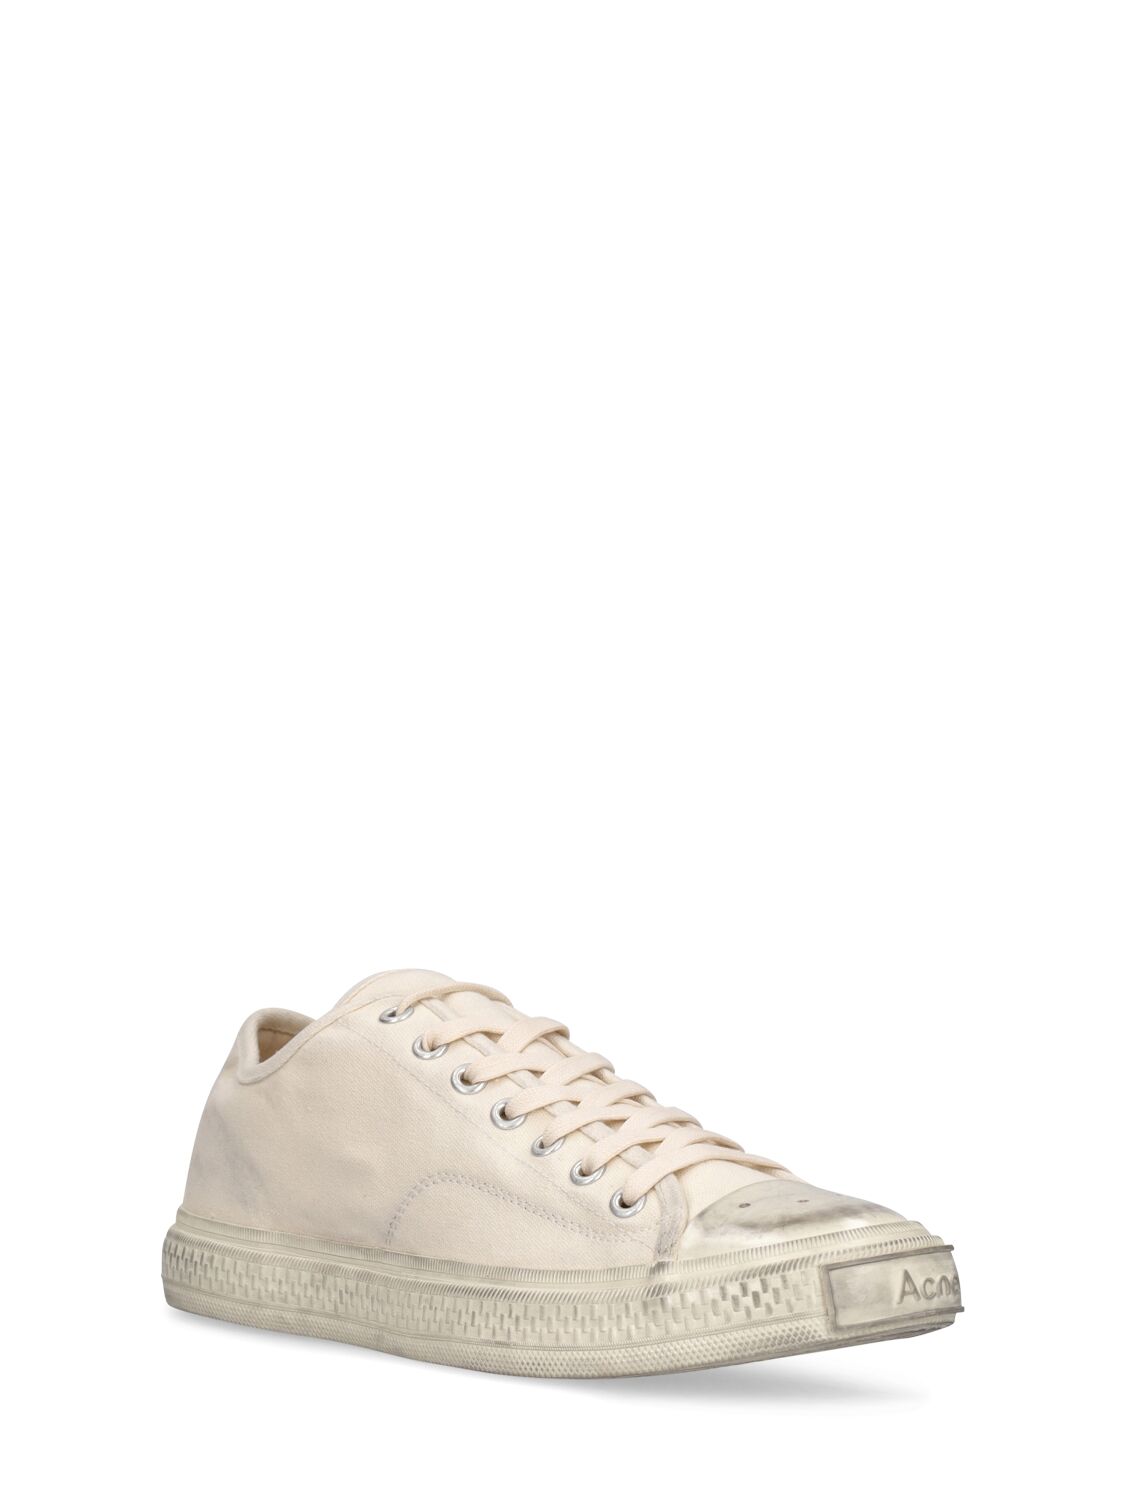 Shop Acne Studios Ballow Soft Tumbled Cotton Sneakers In Off White